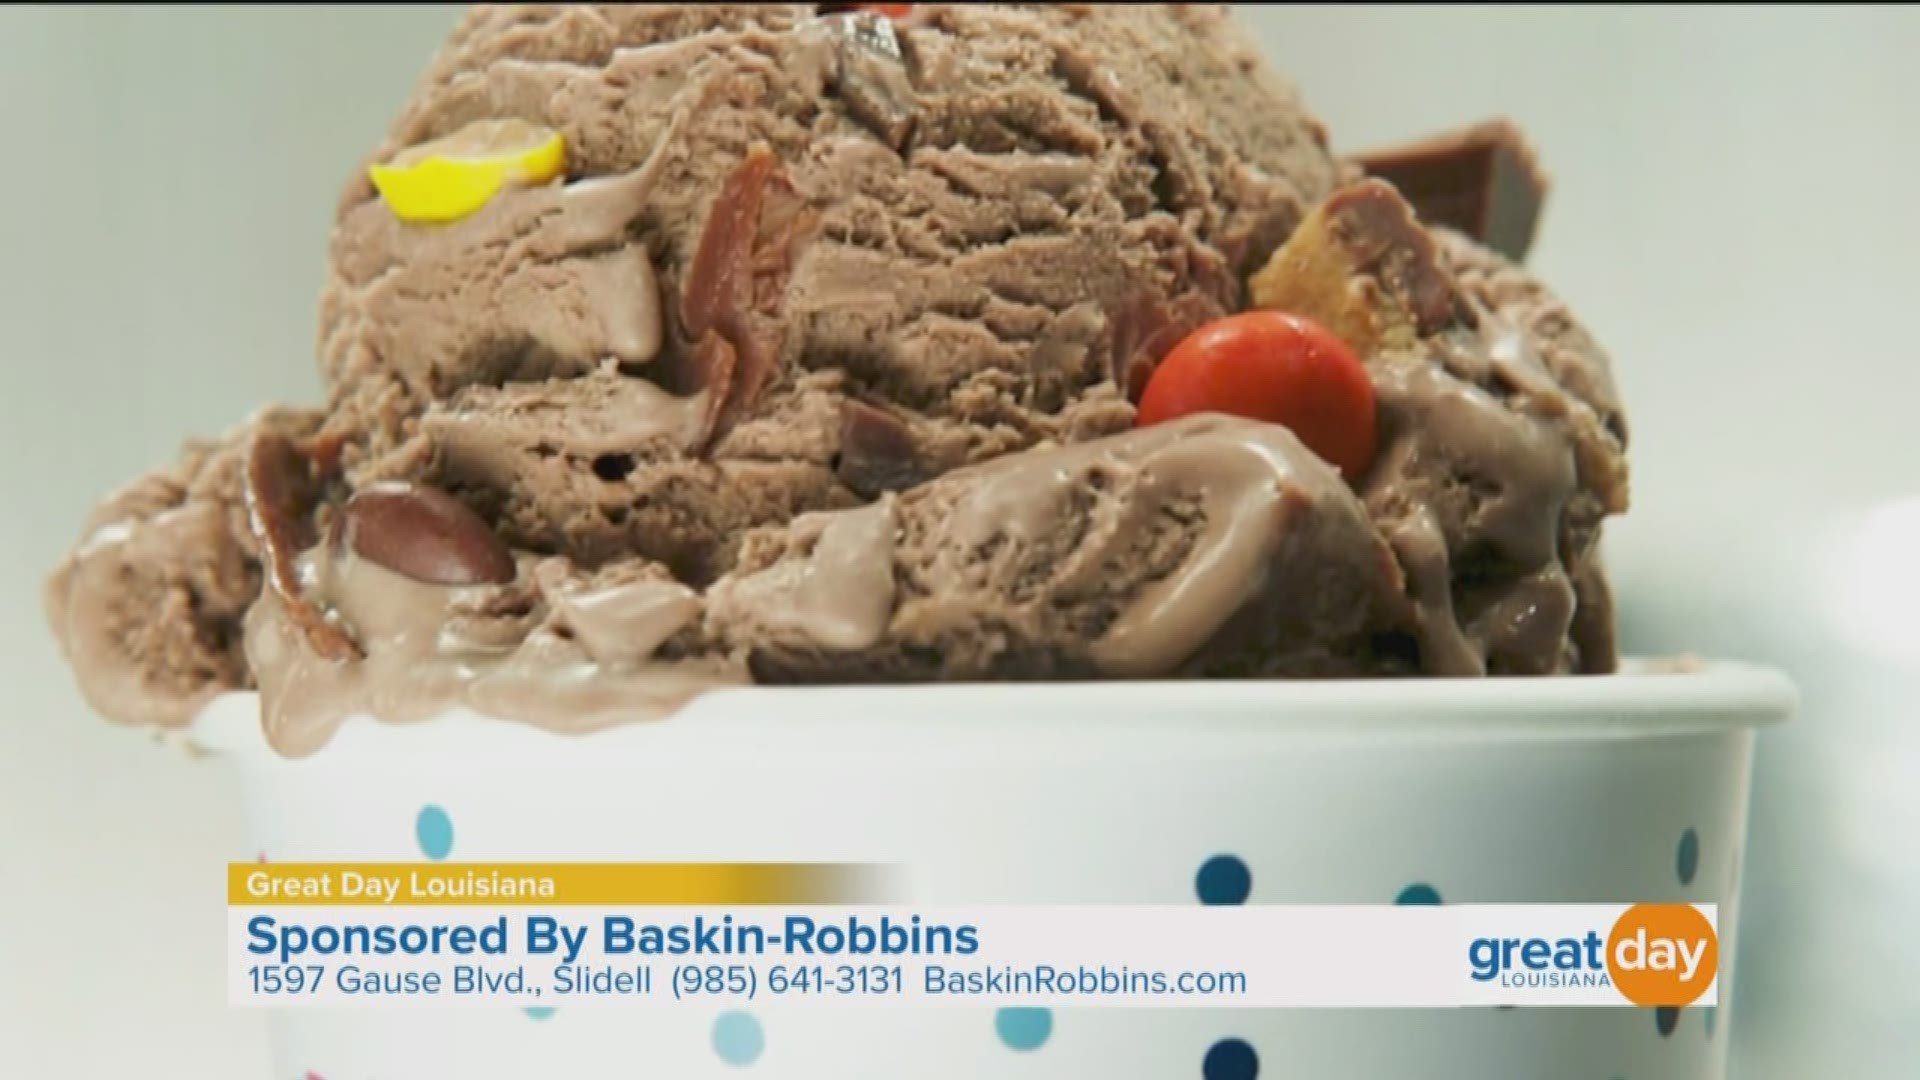 To celebrate National Ice Cream Day, Chef Kevin heads to Baskin-Robbins in Slidell to find out why ice cream in a parlor is so distinctively (and deliciously!) different than store-bought ice cream. He also talks to Coy Faucheux to see how Baskin-Robbins has evolved over the years. Visit them at 1597 Gause Blvd in Slidell or go online to BaskinRobbins.com.